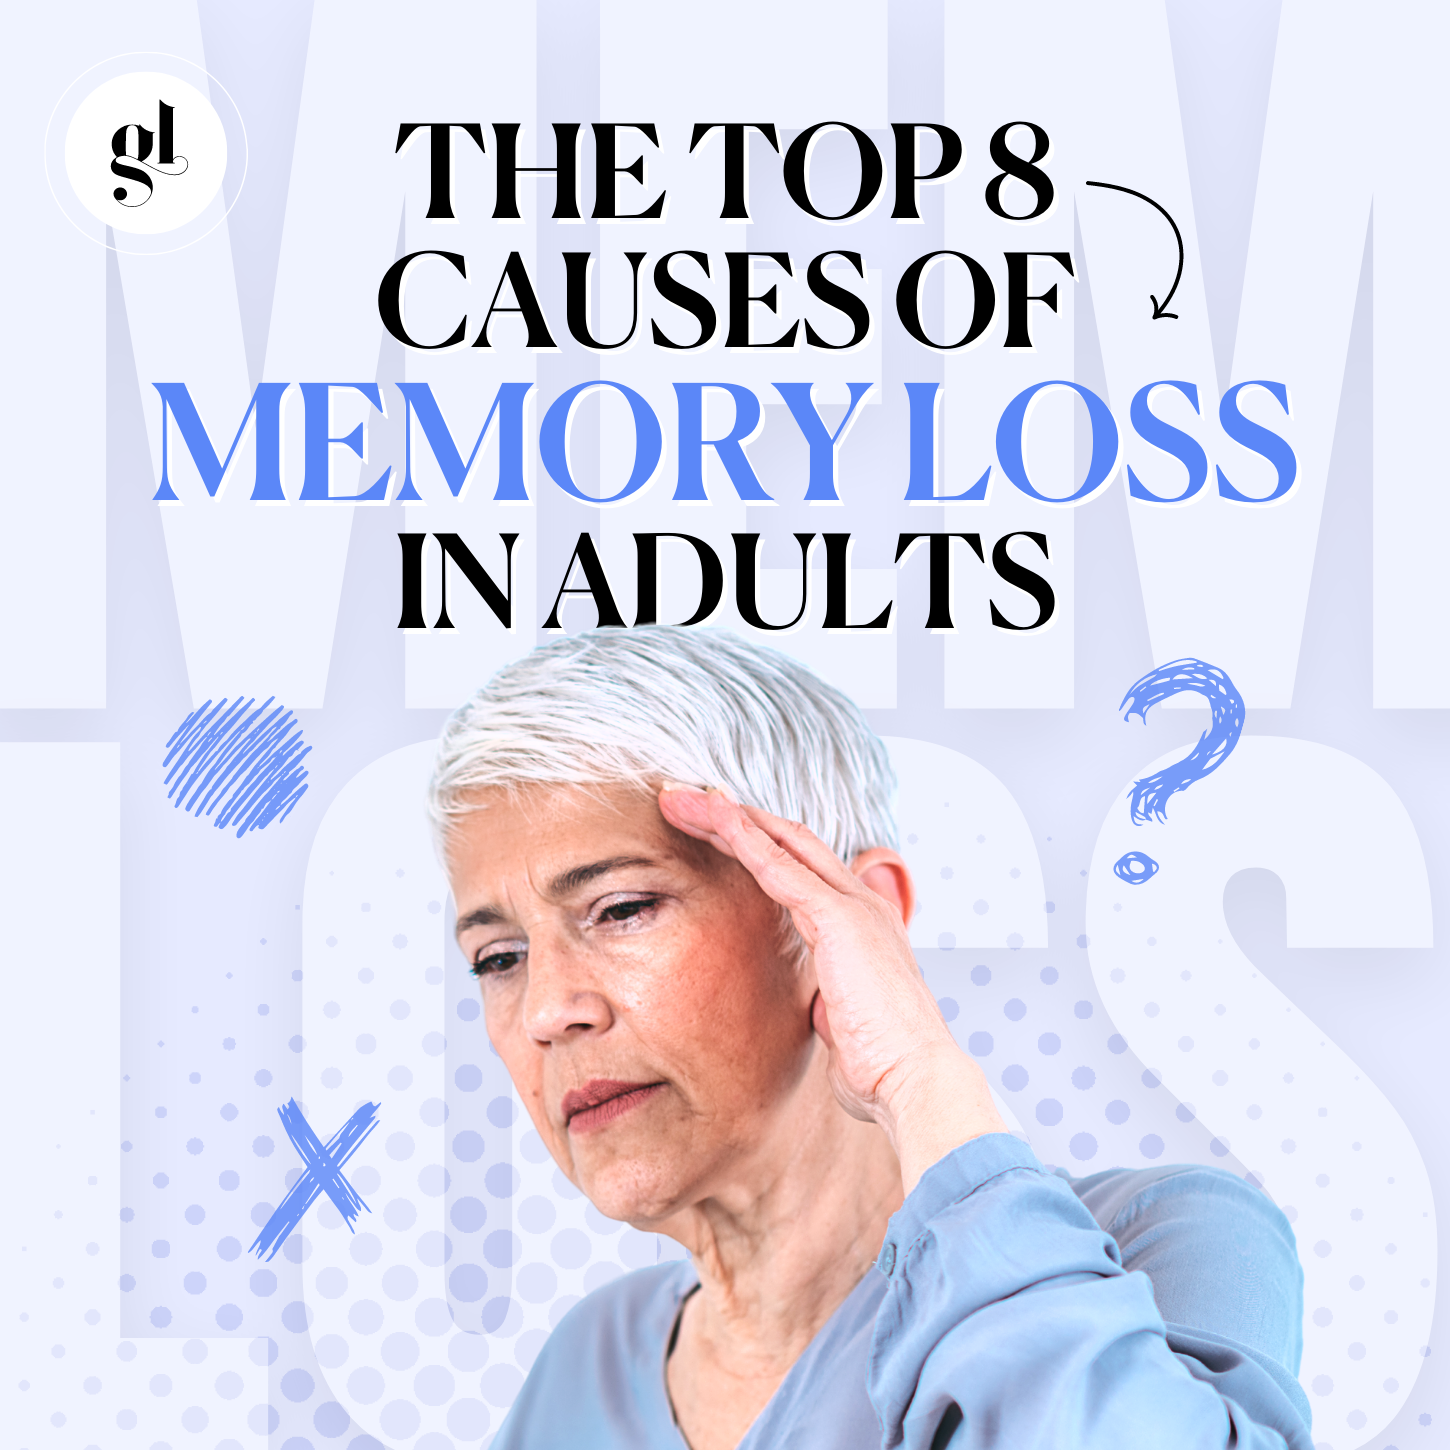 The Top 8 Causes of Memory Loss In Adults